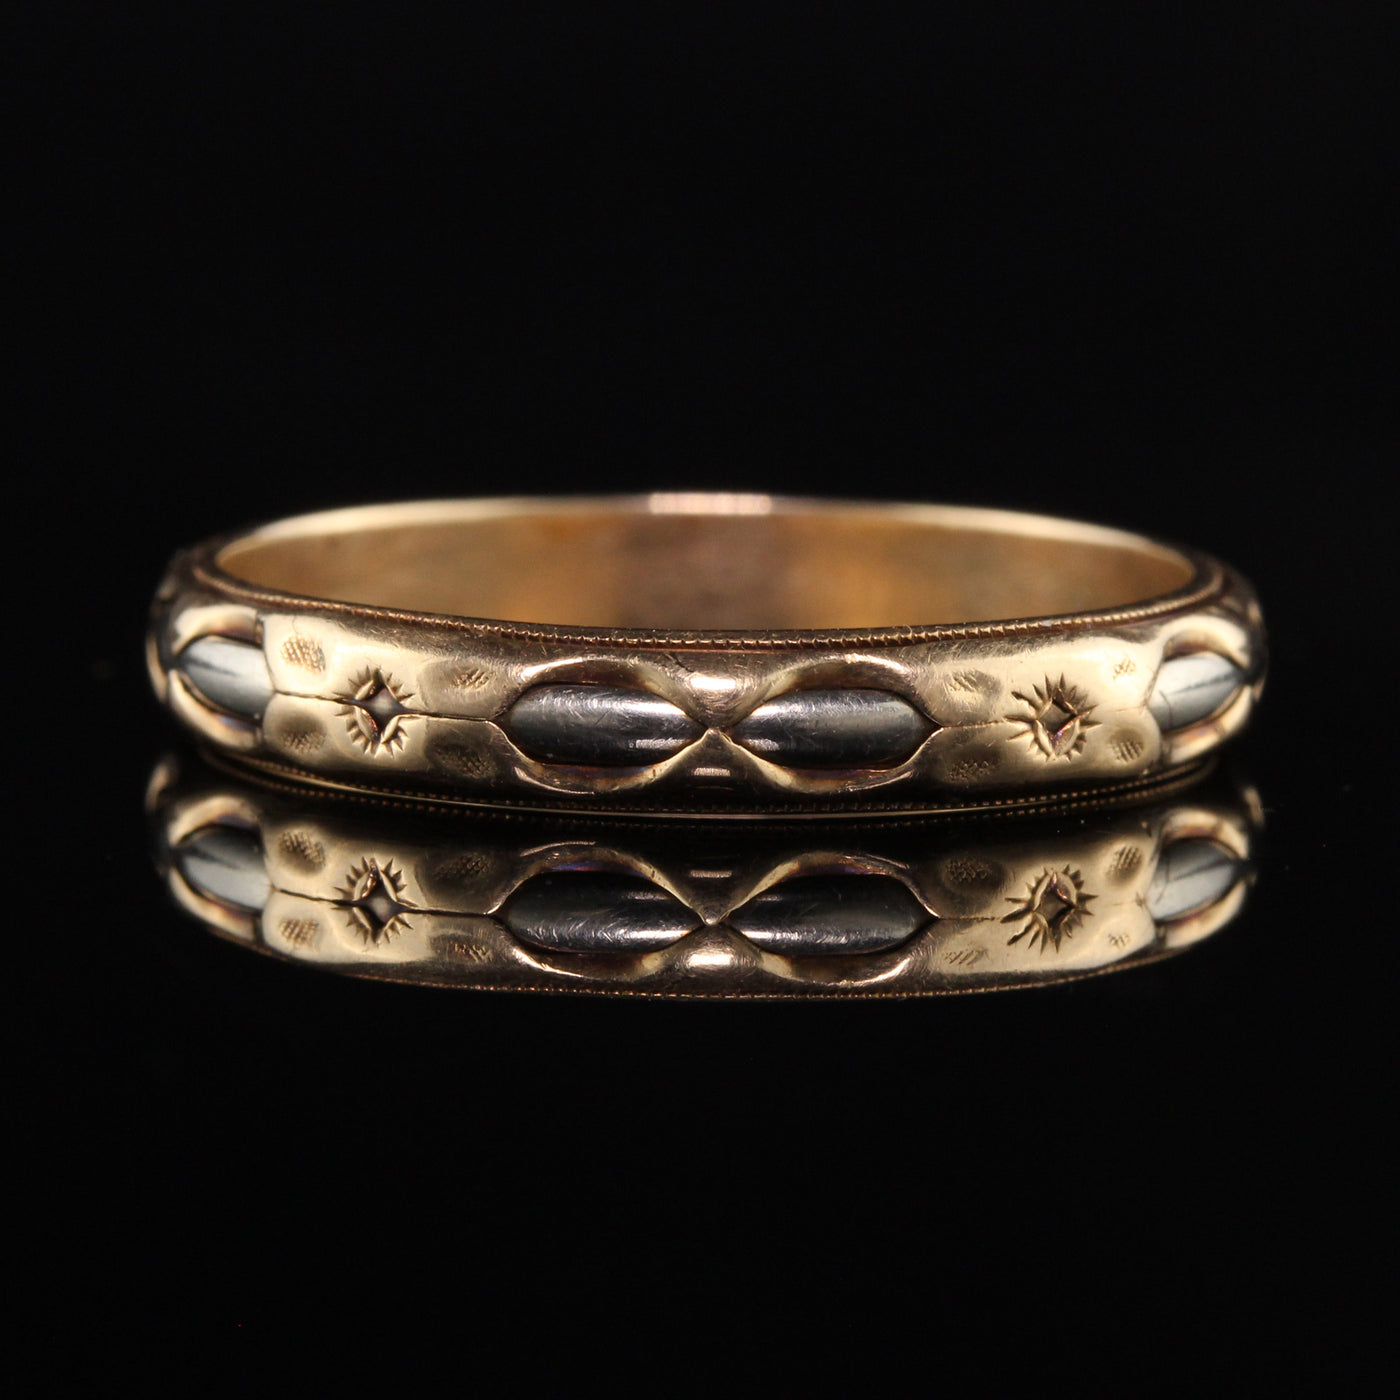 Antique Art Deco Art Carved 14K Yellow Gold Two Tone Engraved Wedding Band